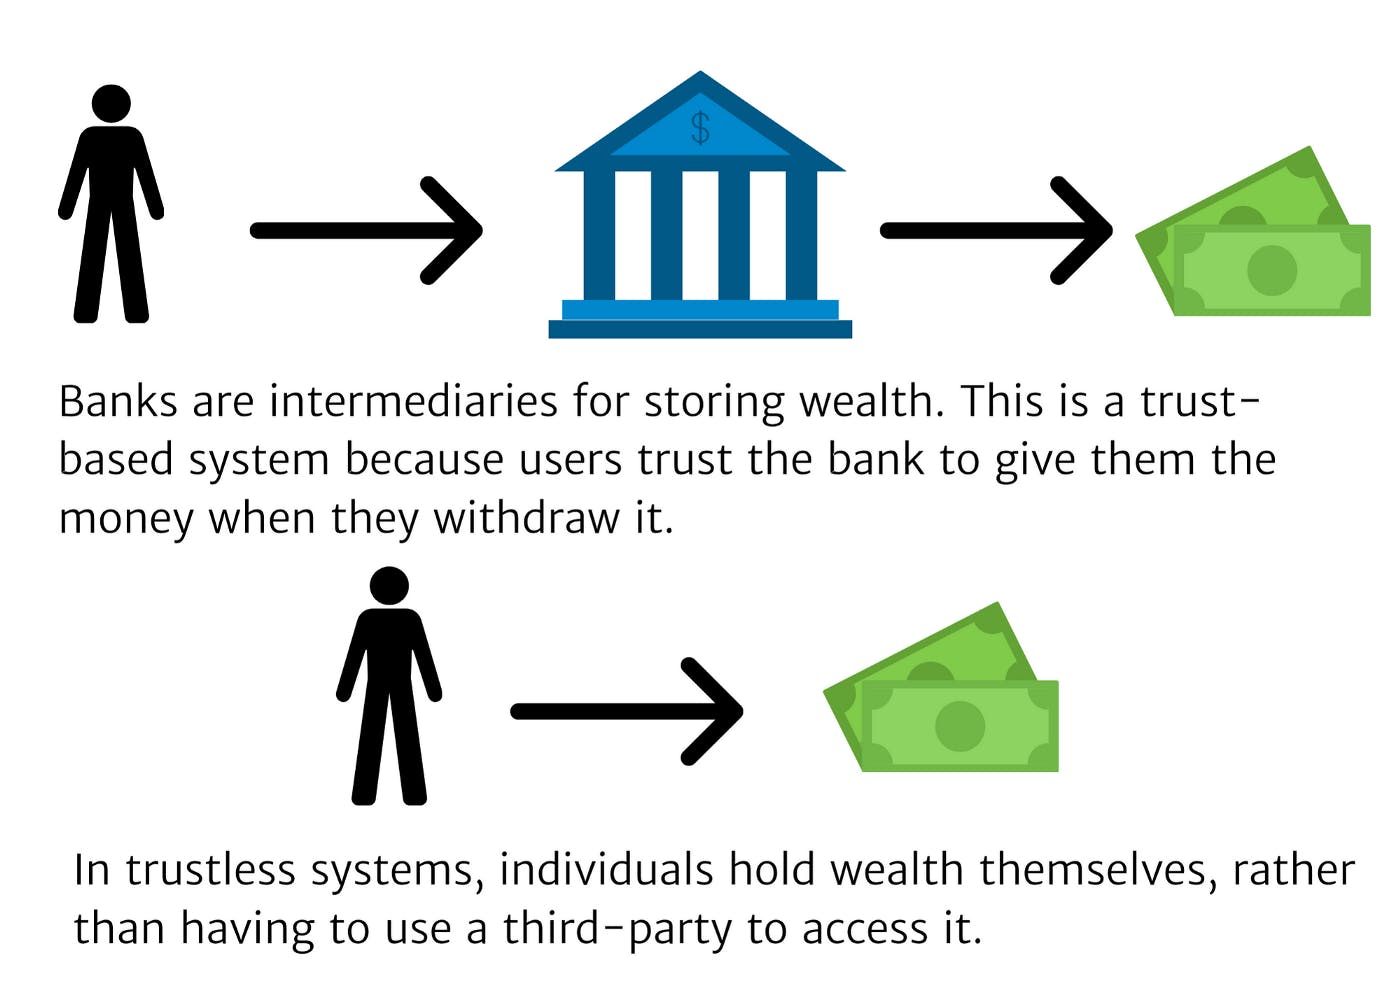 Image source: Samantha Marin, "What is a Trustless System?"